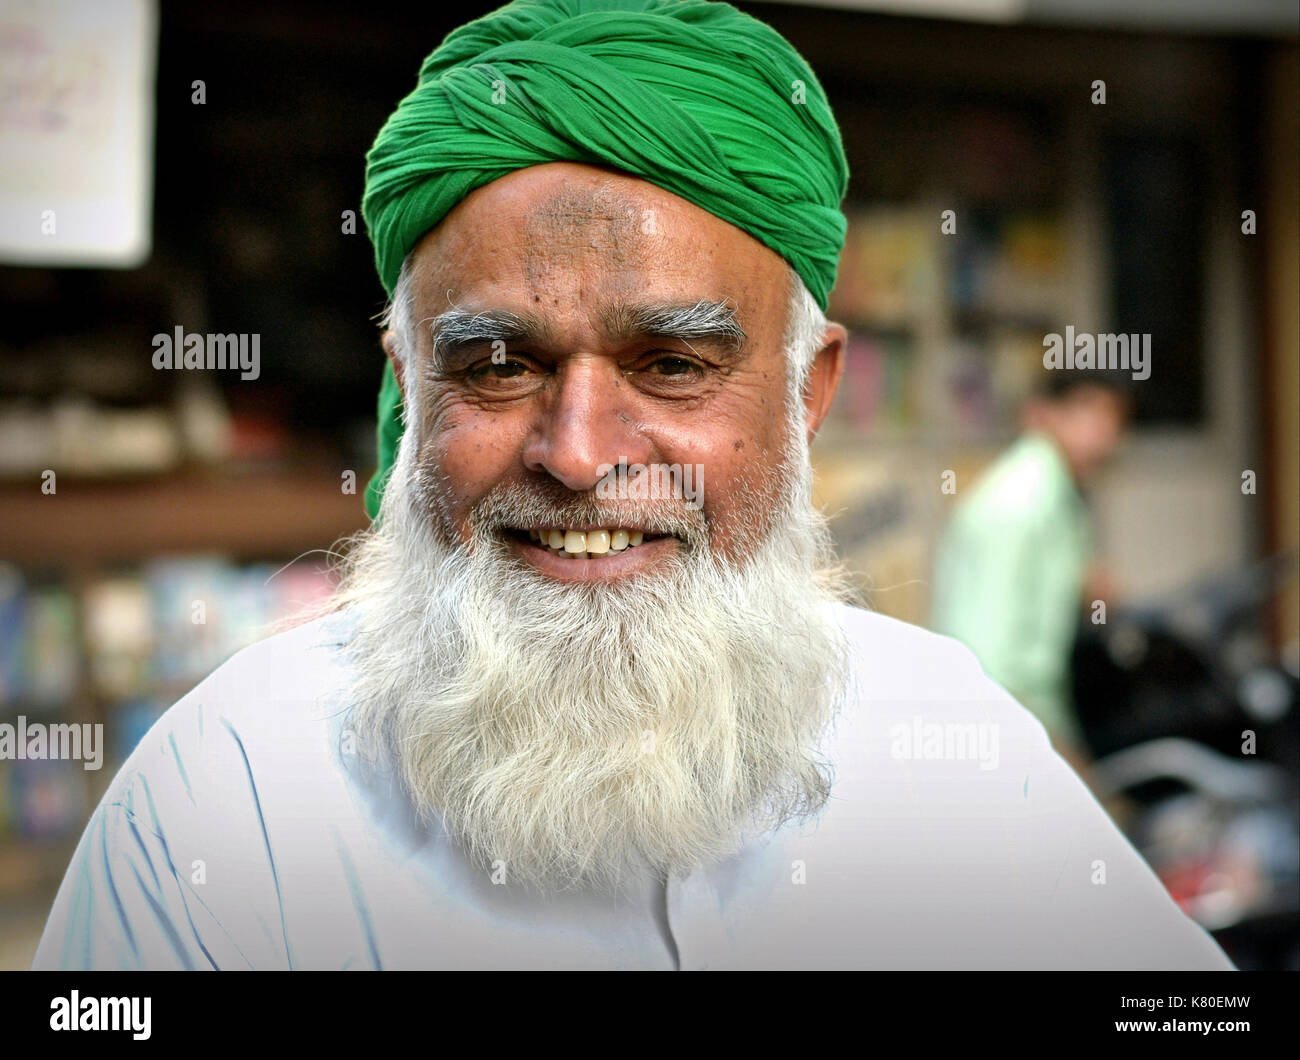 Elderly Indian Muslim man with white Muslim full-beard and prayer bump (zebibah) on his forehead wears a green turban and smiles for the camera. Stock Photo